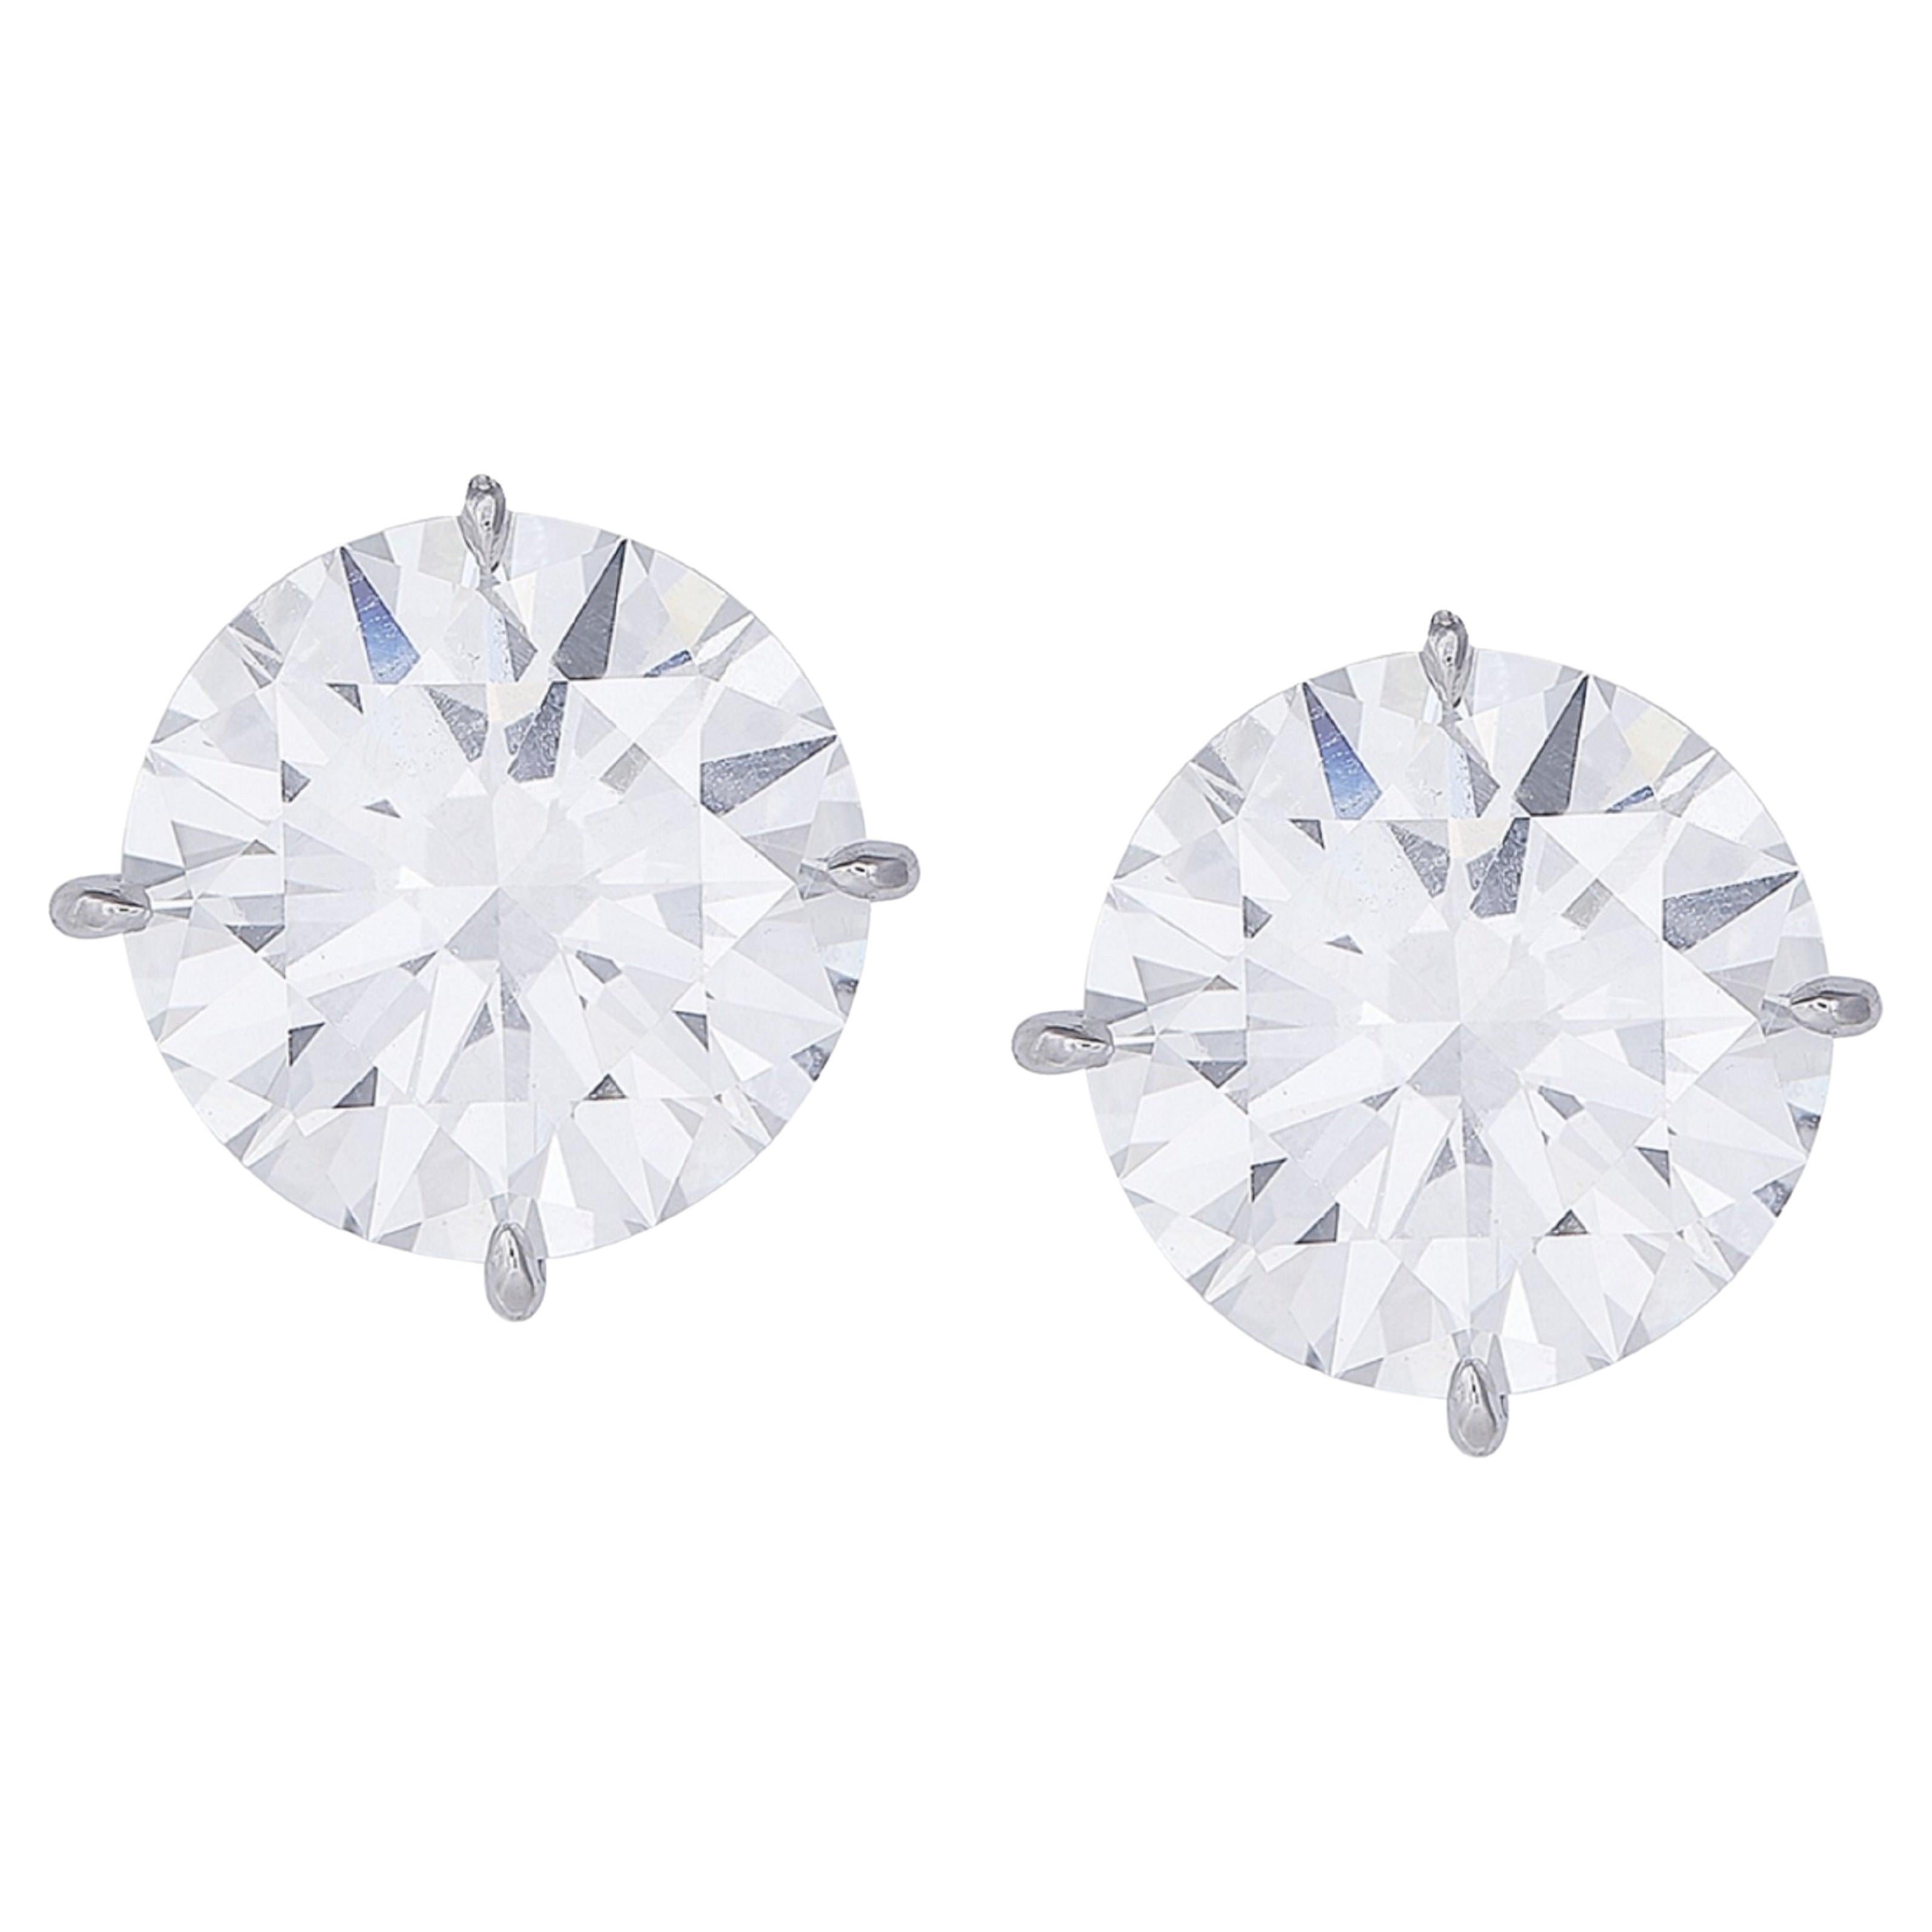 GIA Certified 3.52 Carat Round Brilliant Cut Diamond Studs For Sale at ...